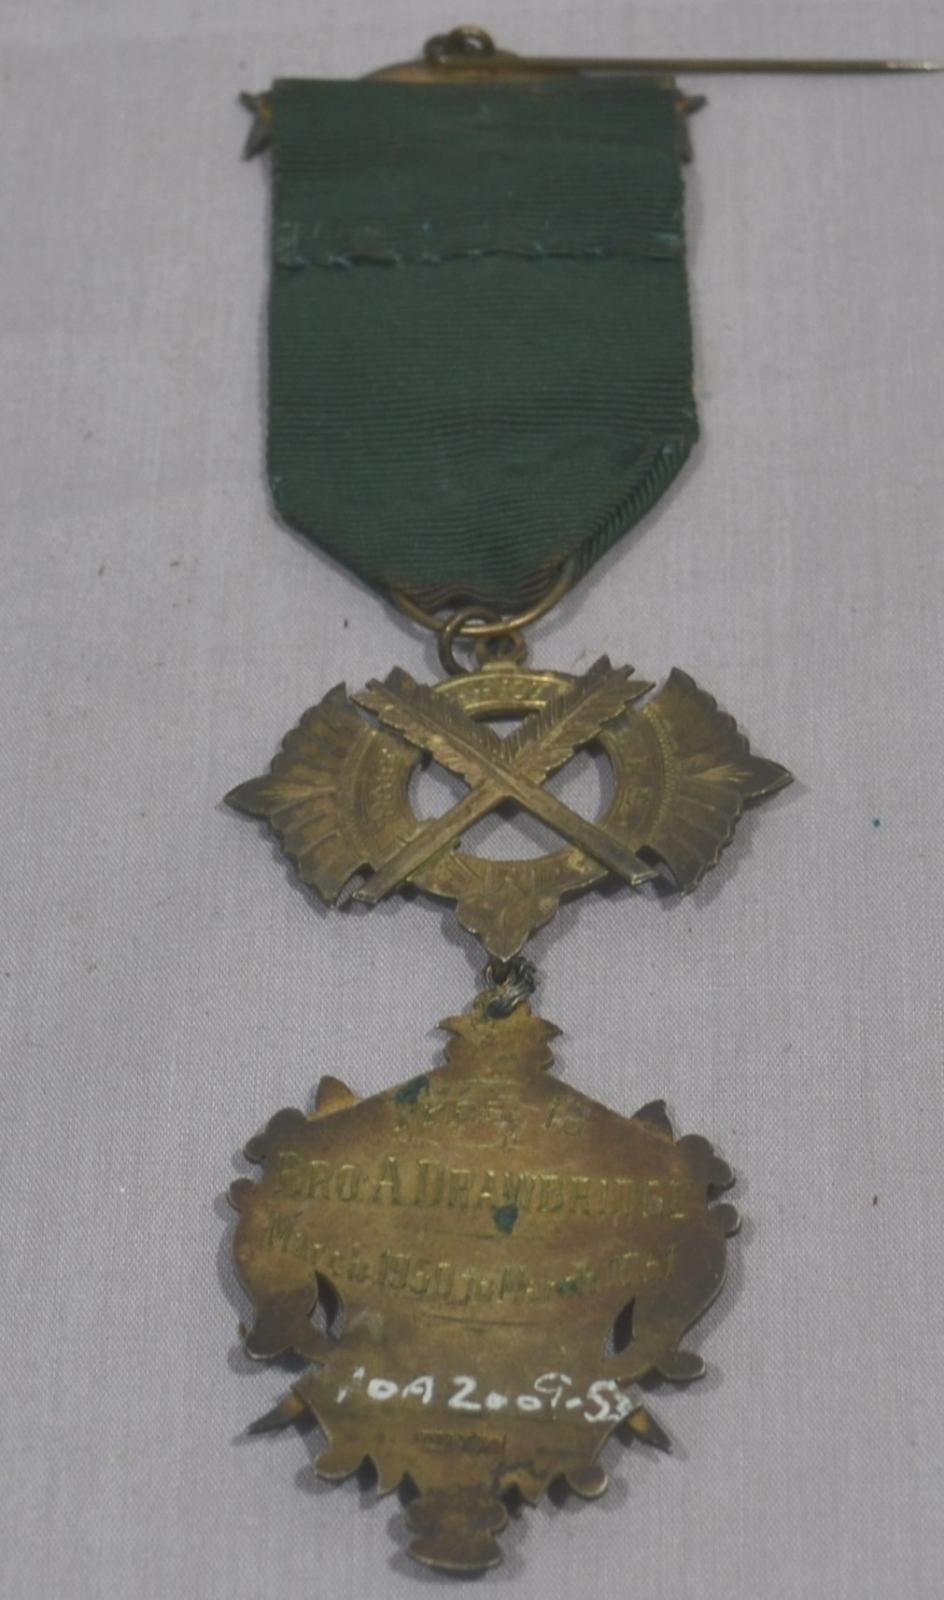 Reverse side of brass medal with green ribbon, inscription on back of medal 'Bro. A. Drawbridge / March 1950 to March 1951'